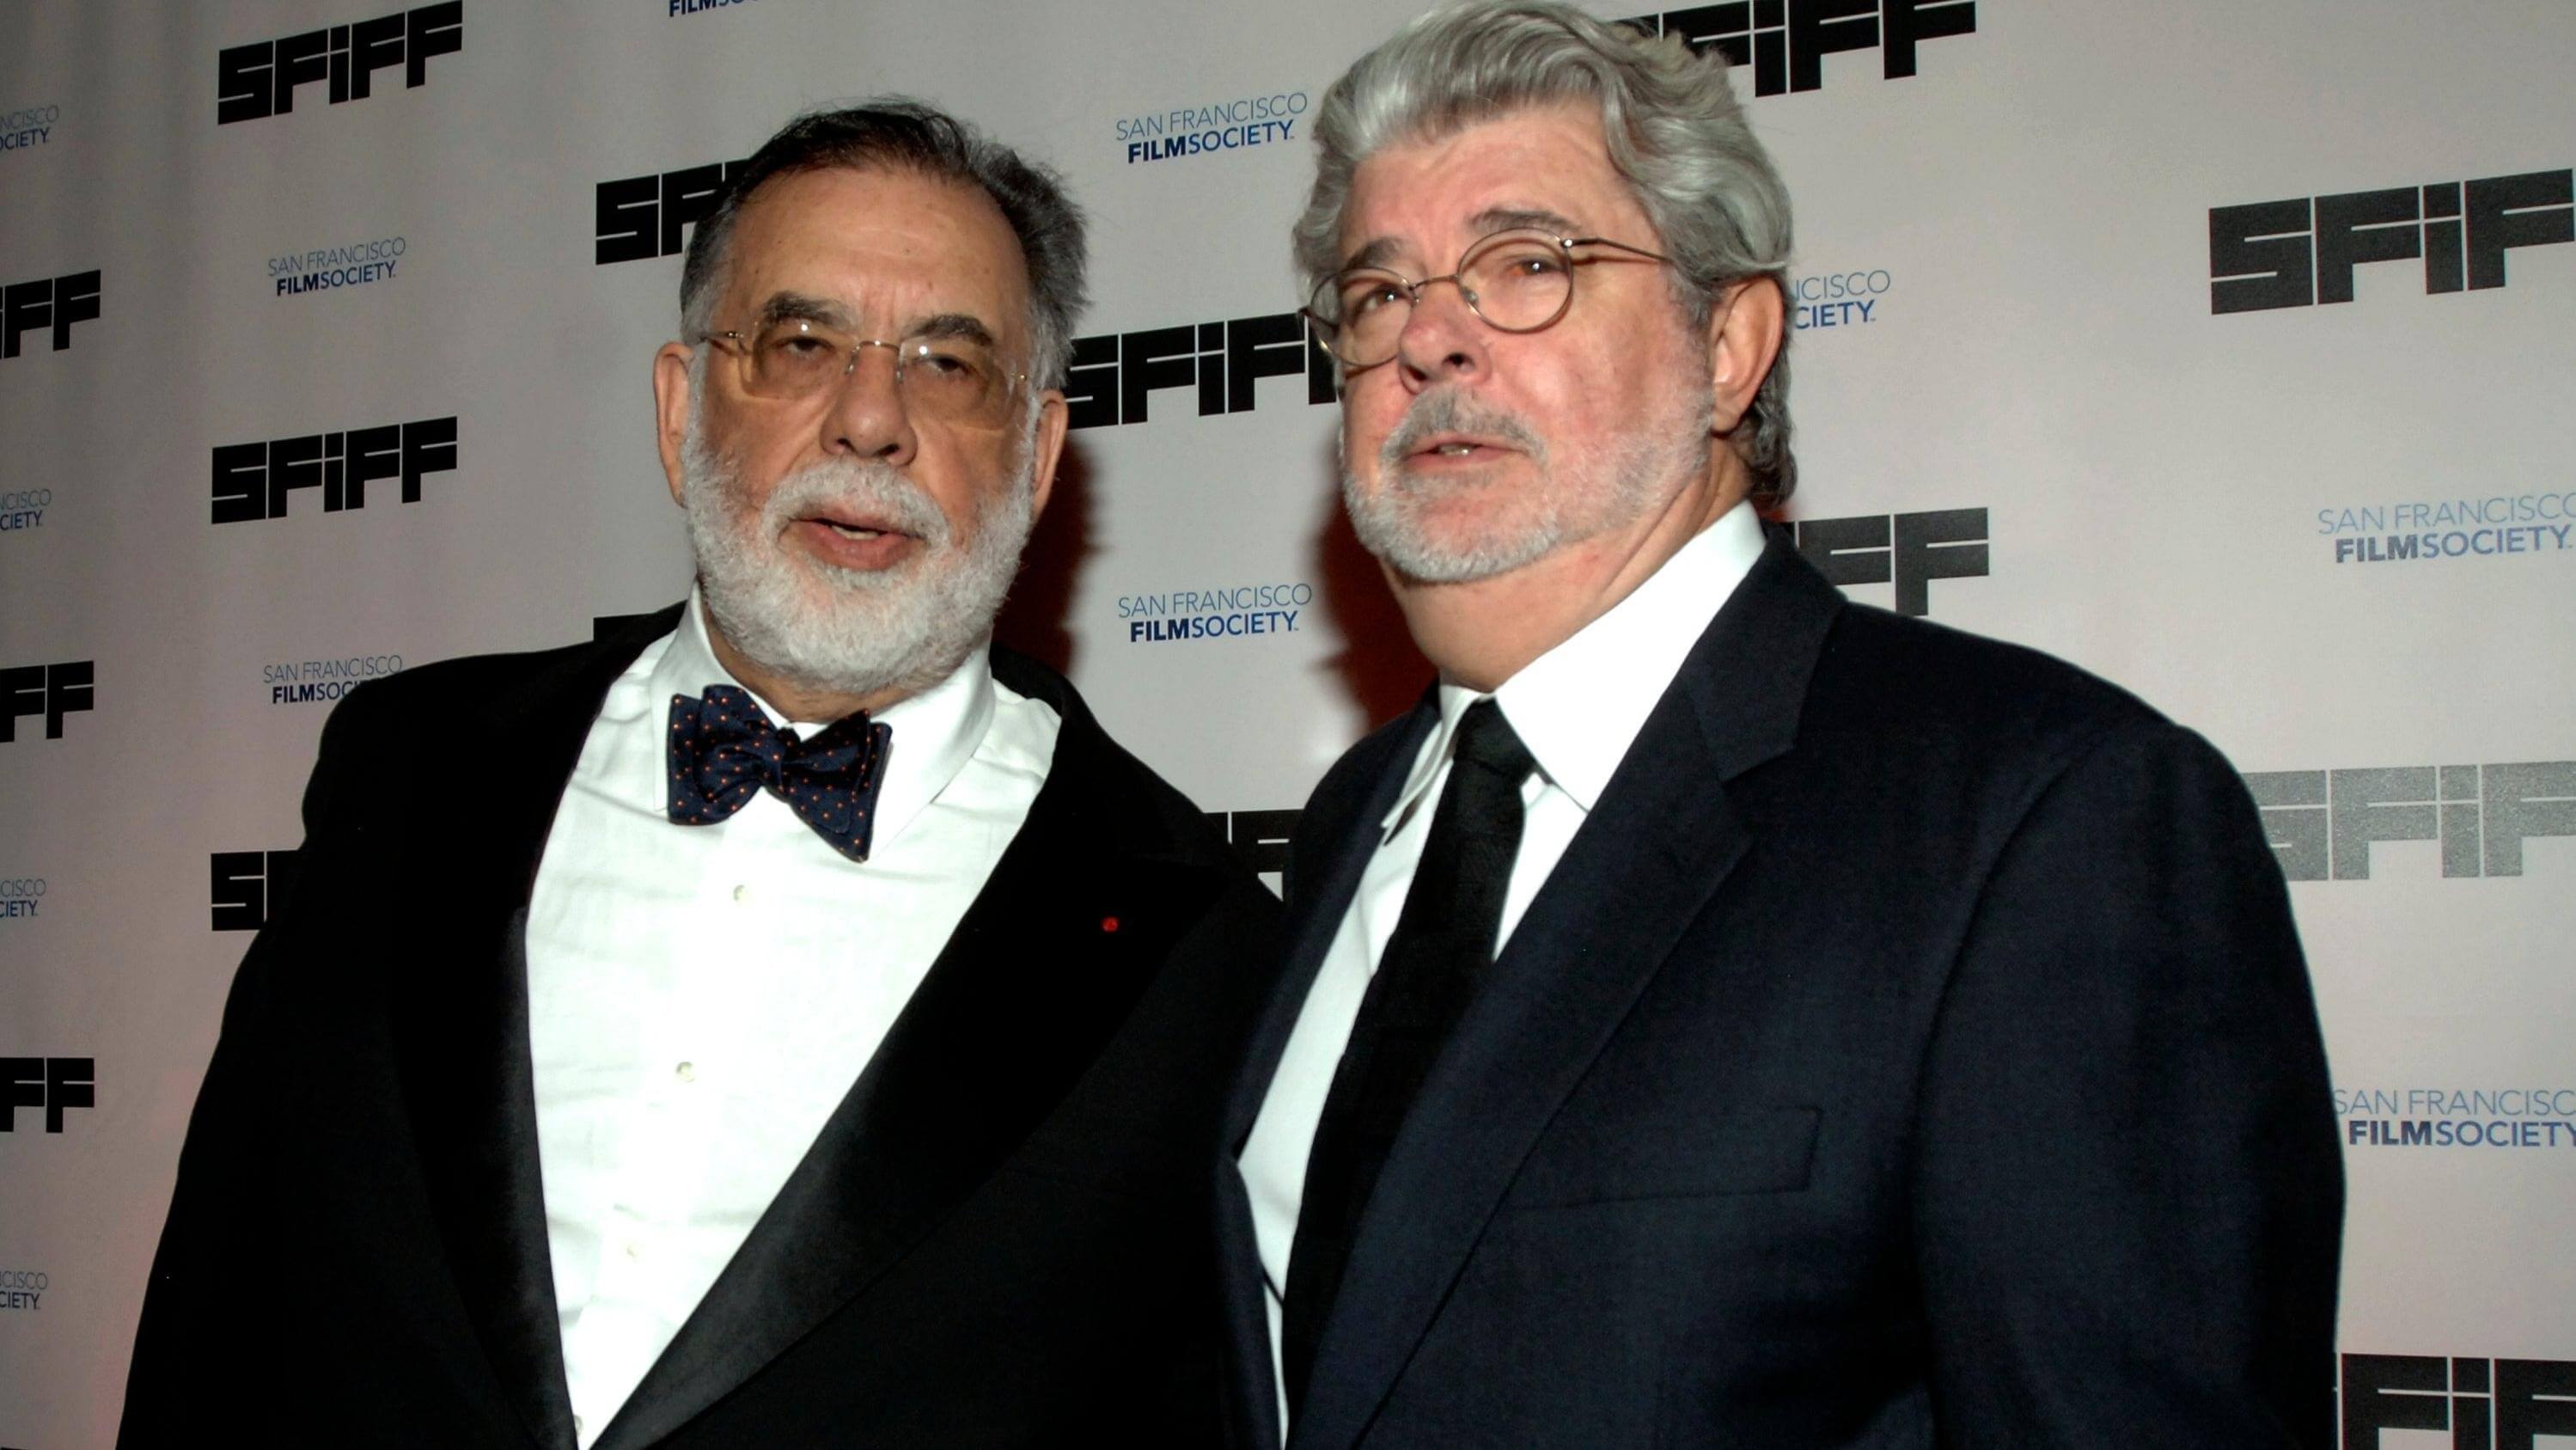 Movie Brats George Lucas and Francis Ford Coppola are heading to Cannes